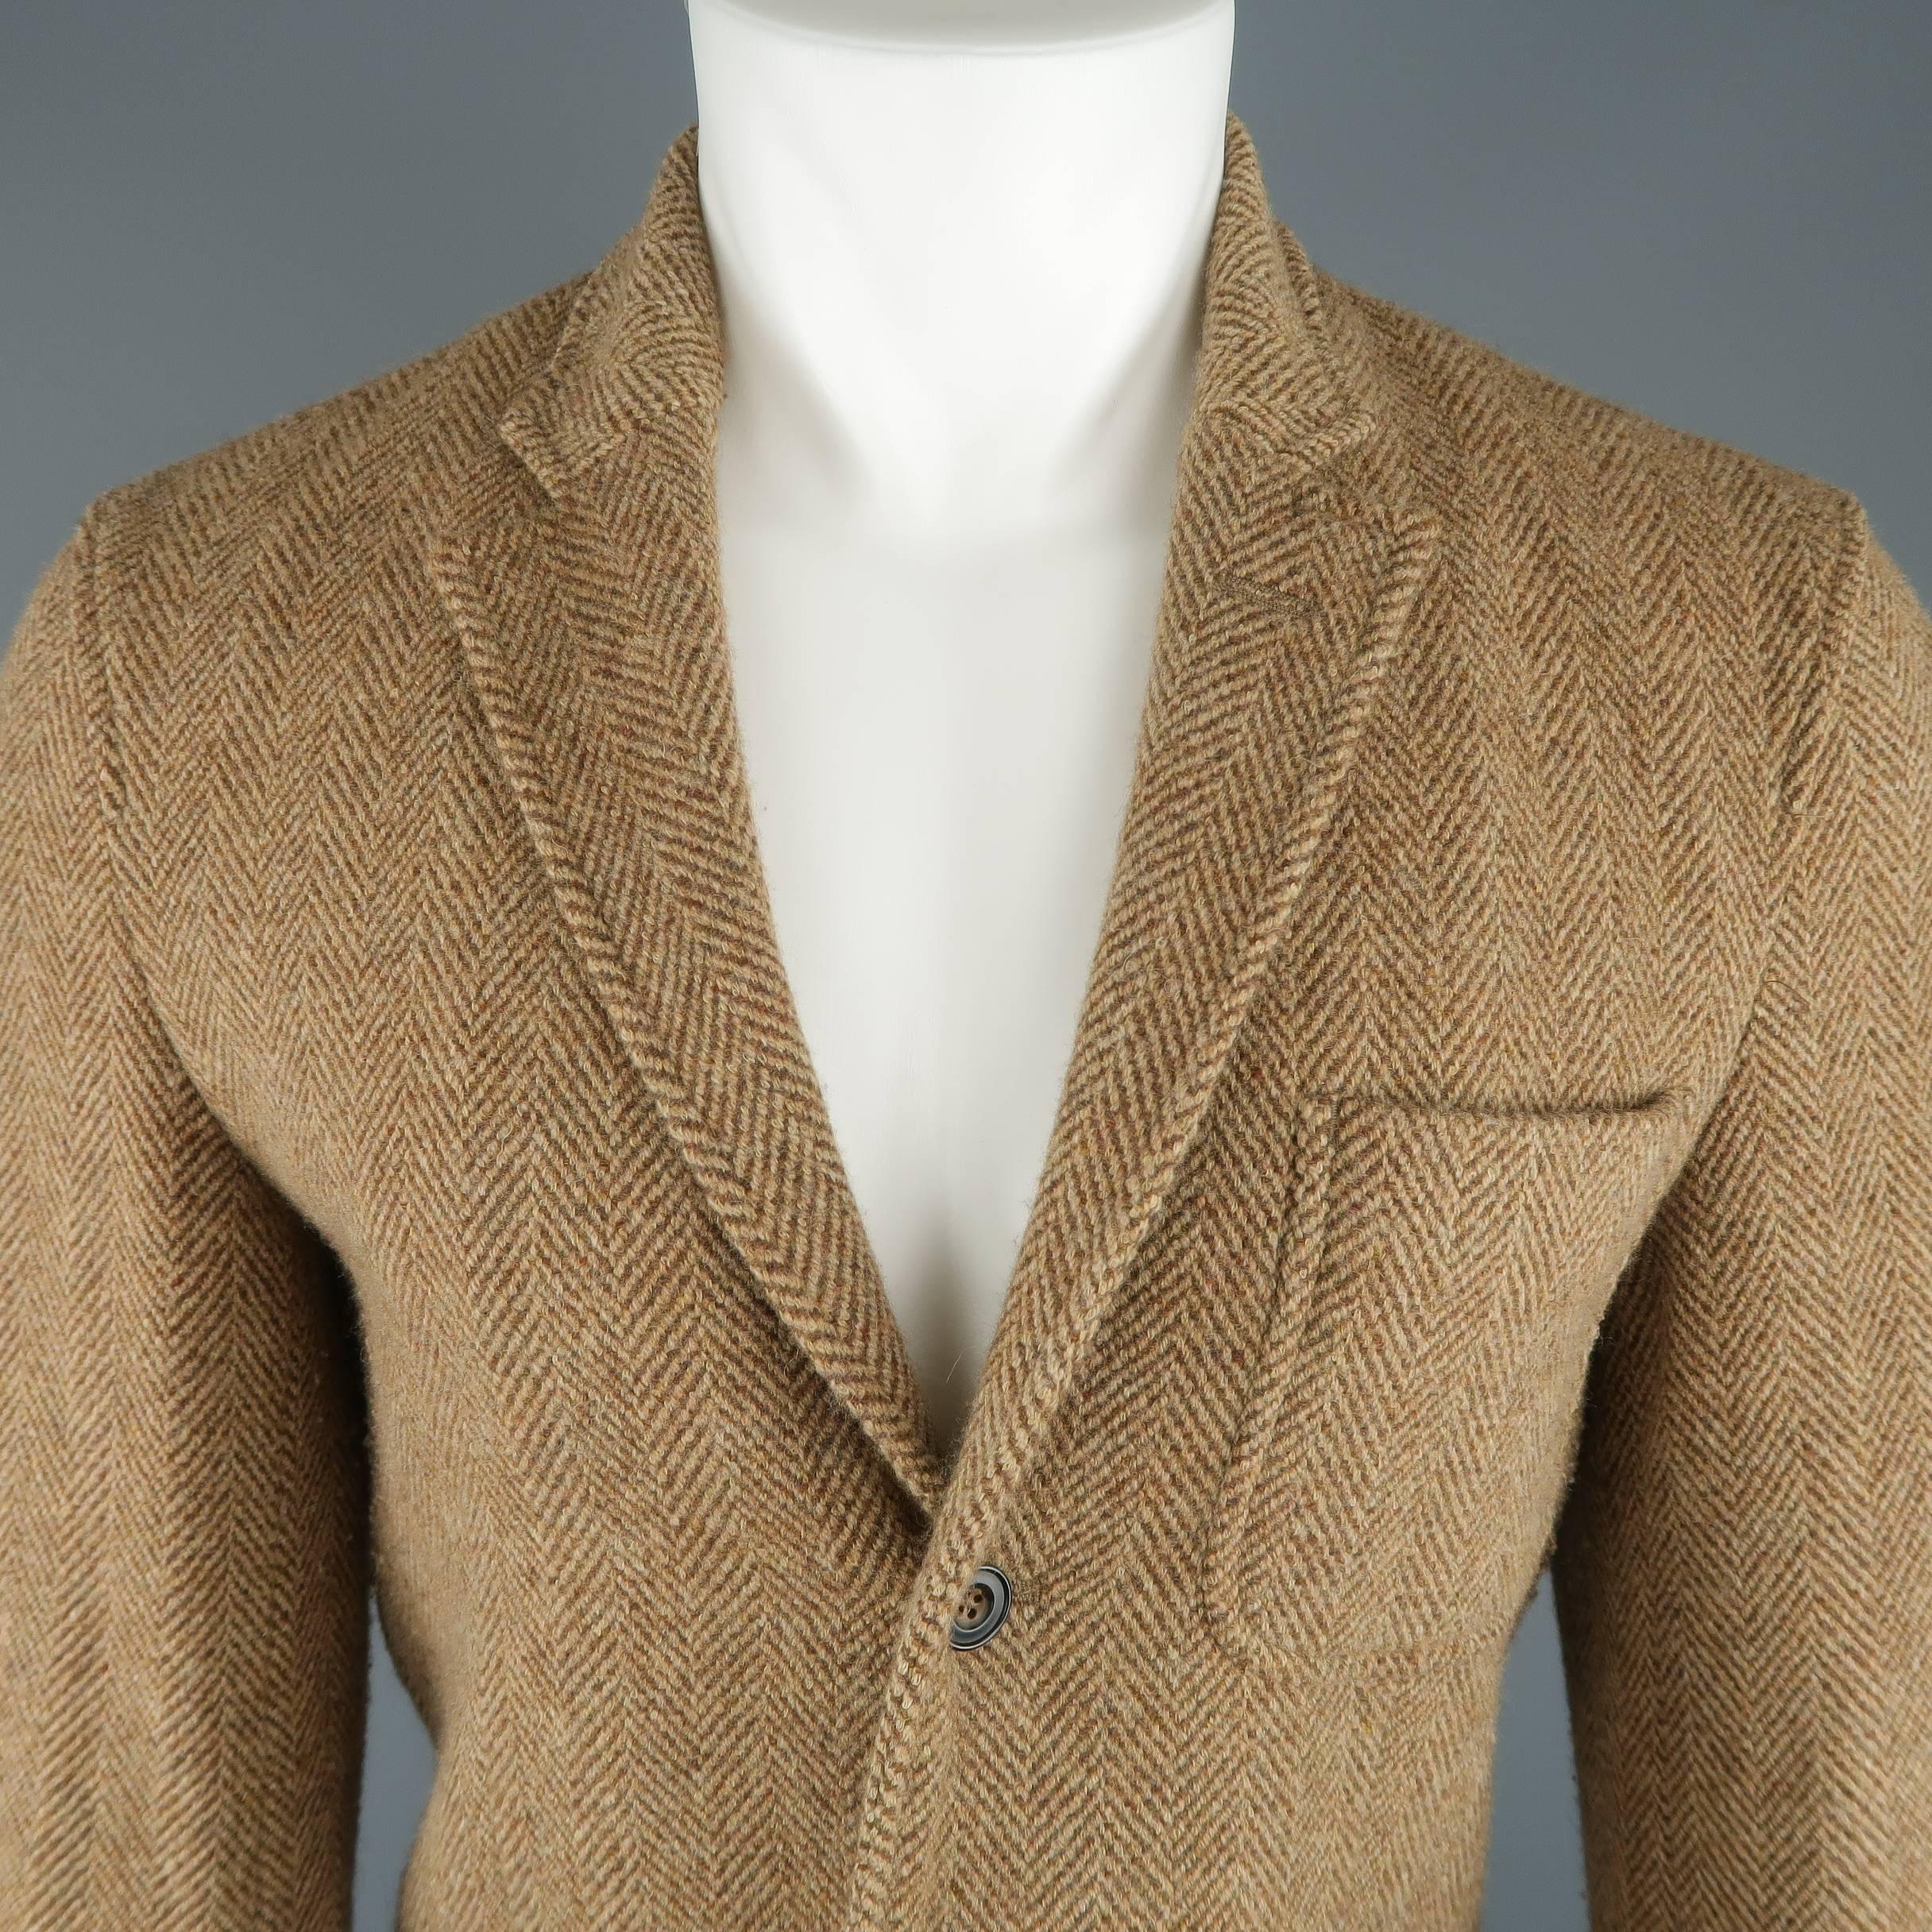 POLO RALPH LAUREN sport coat comes in tan Herringbone wool with a notch lapel, three button front, and patch flap pockets.
 
Good Pre-Owned Condition.
Marked: 38 R
 
Measurements:
 
Shoulder: 17 in.
Chest: 40 in.
Sleeve: 26 in.
Length: 30 in.
